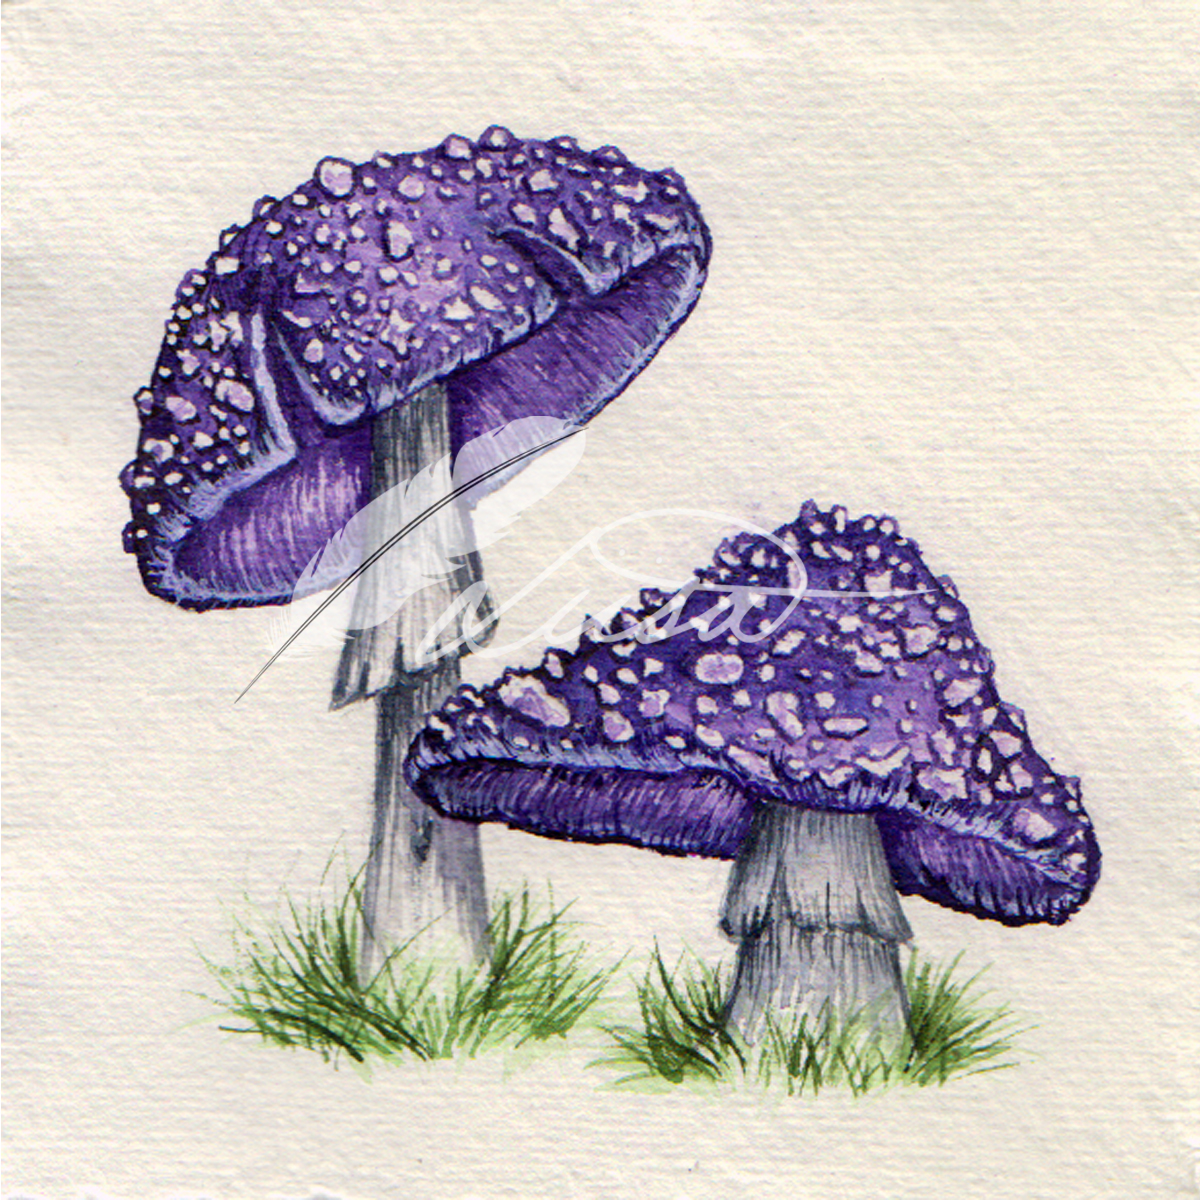 Commission of Pair of Purple Toadstools by Liisa Clark